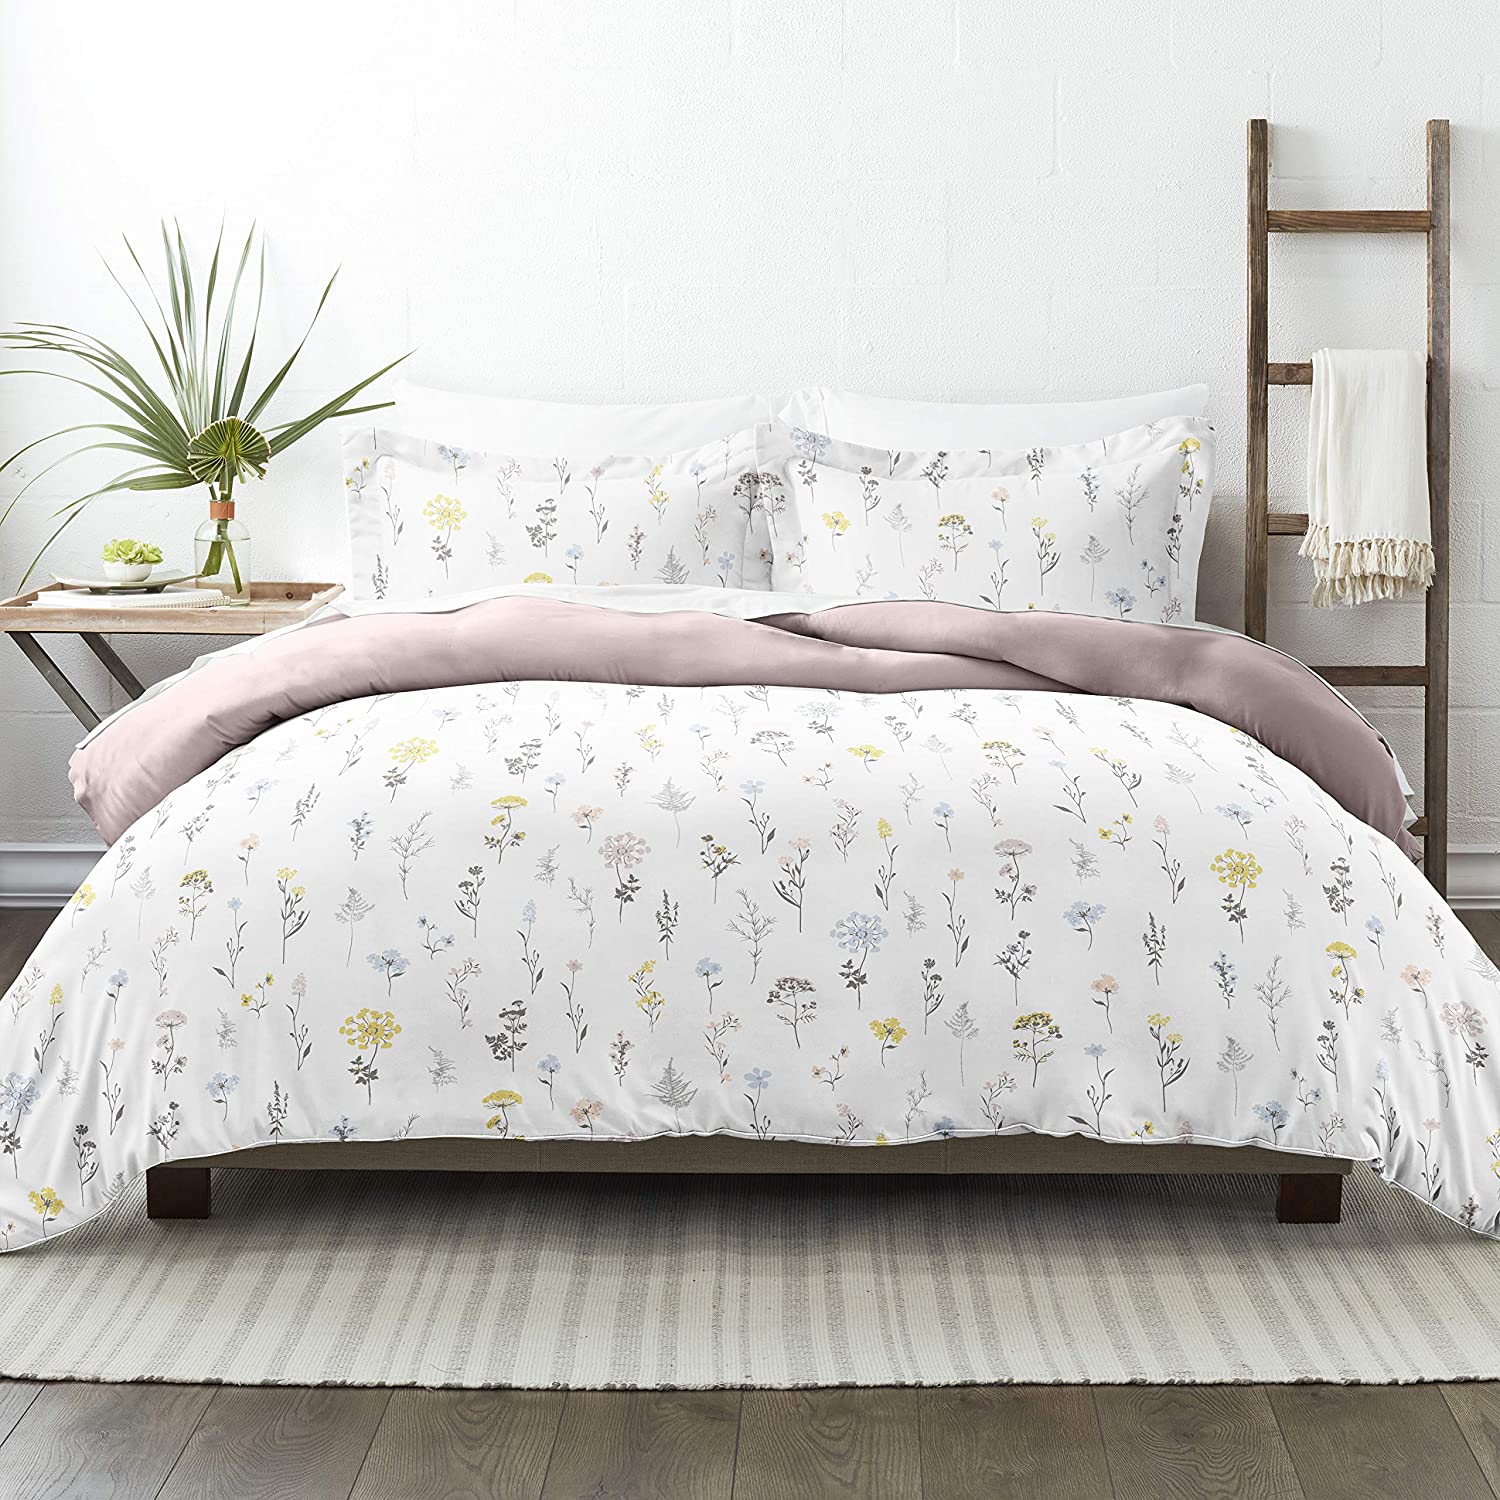 Price:$63.71  Market Premium Ultra Soft Wild Flower Pattern 3 Piece Reversible Duvet Cover Set Twin/Twin Extra Long Pink : Home & Kitchen